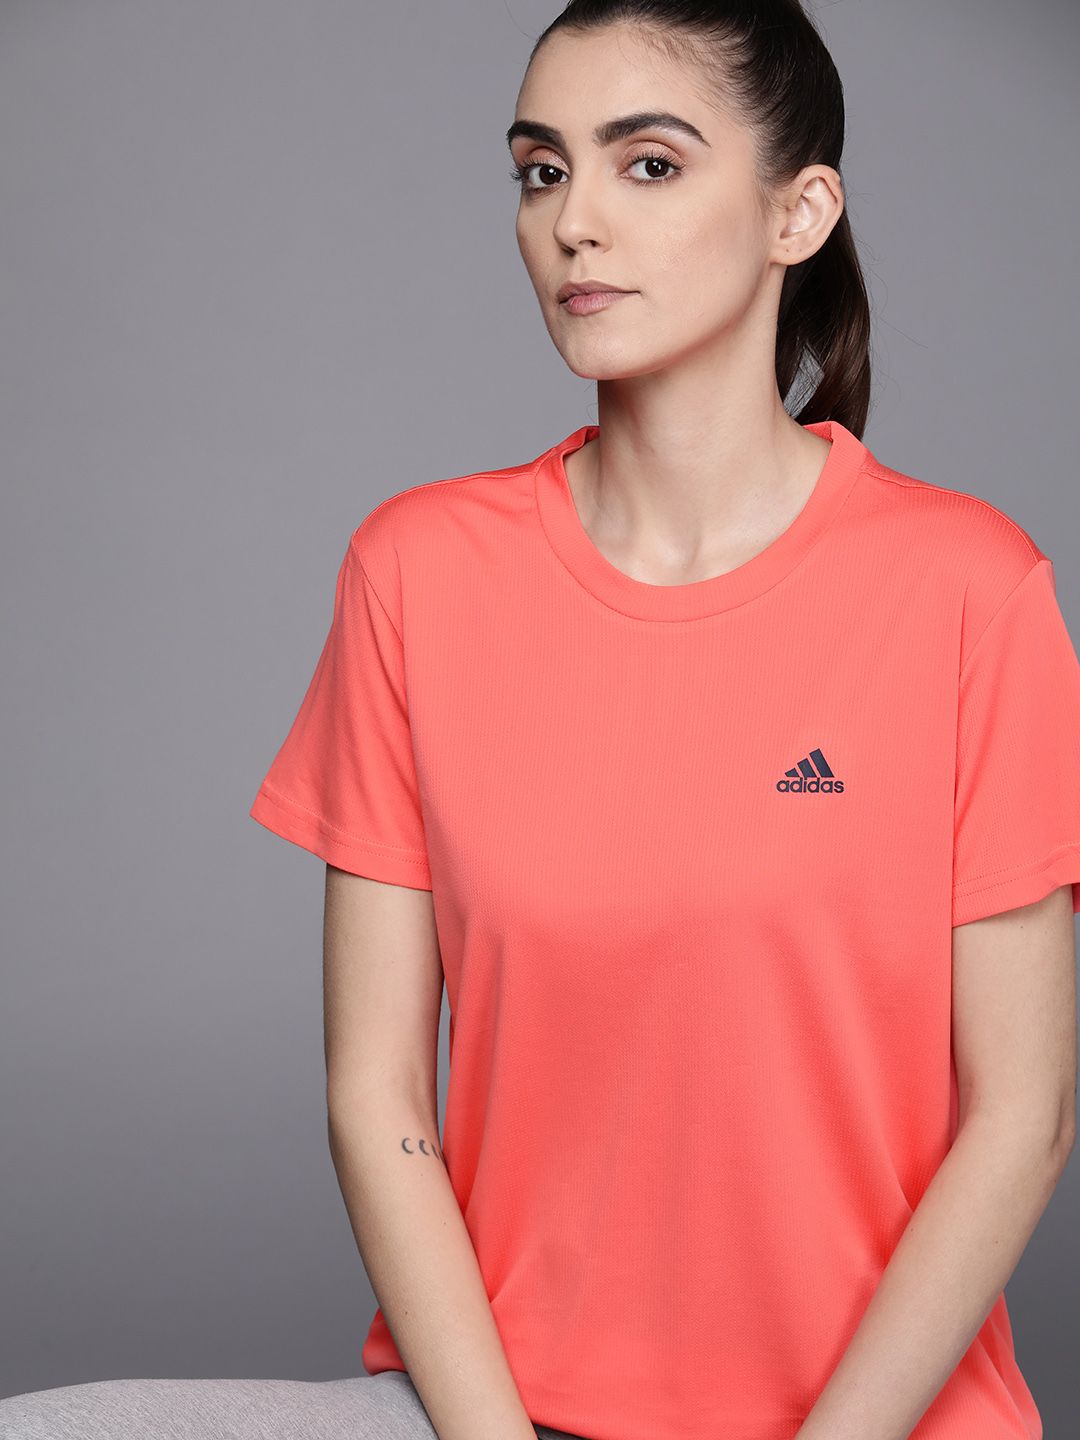 ADIDAS Women Coral Red Solid Aeroready Designed 2 Move 3-Stripes Sport T-shirt Price in India